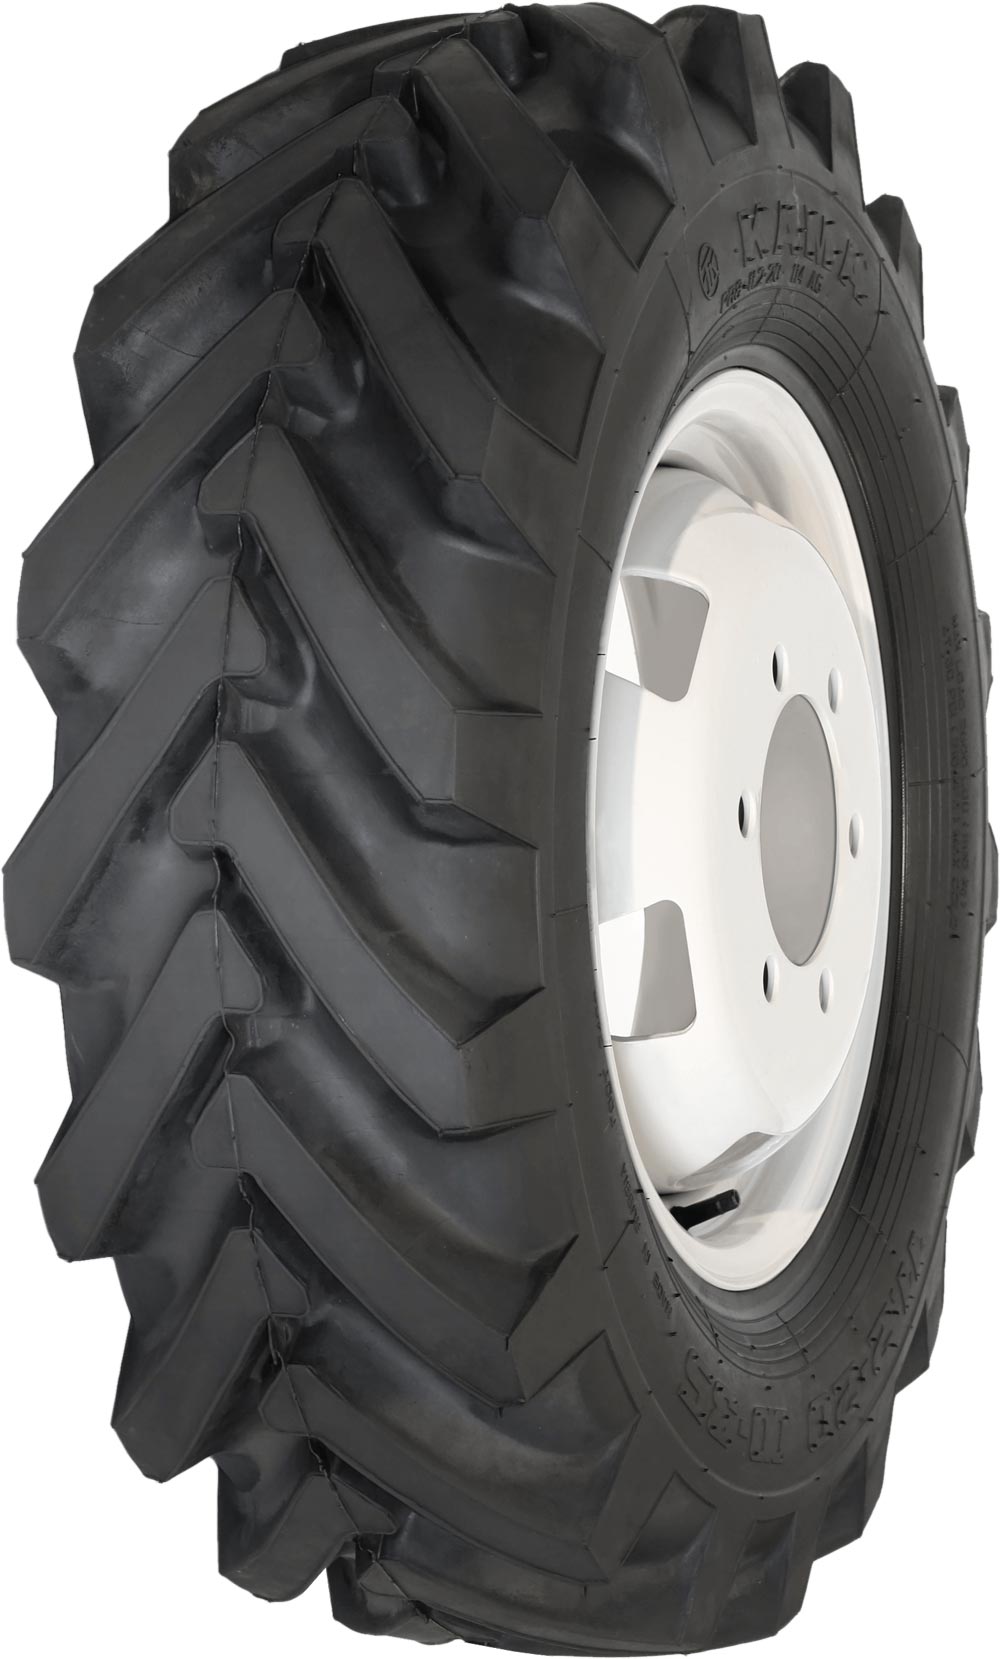 product_type-industrial_tires KAMA Ф-35 8PR 11.2 R20 A